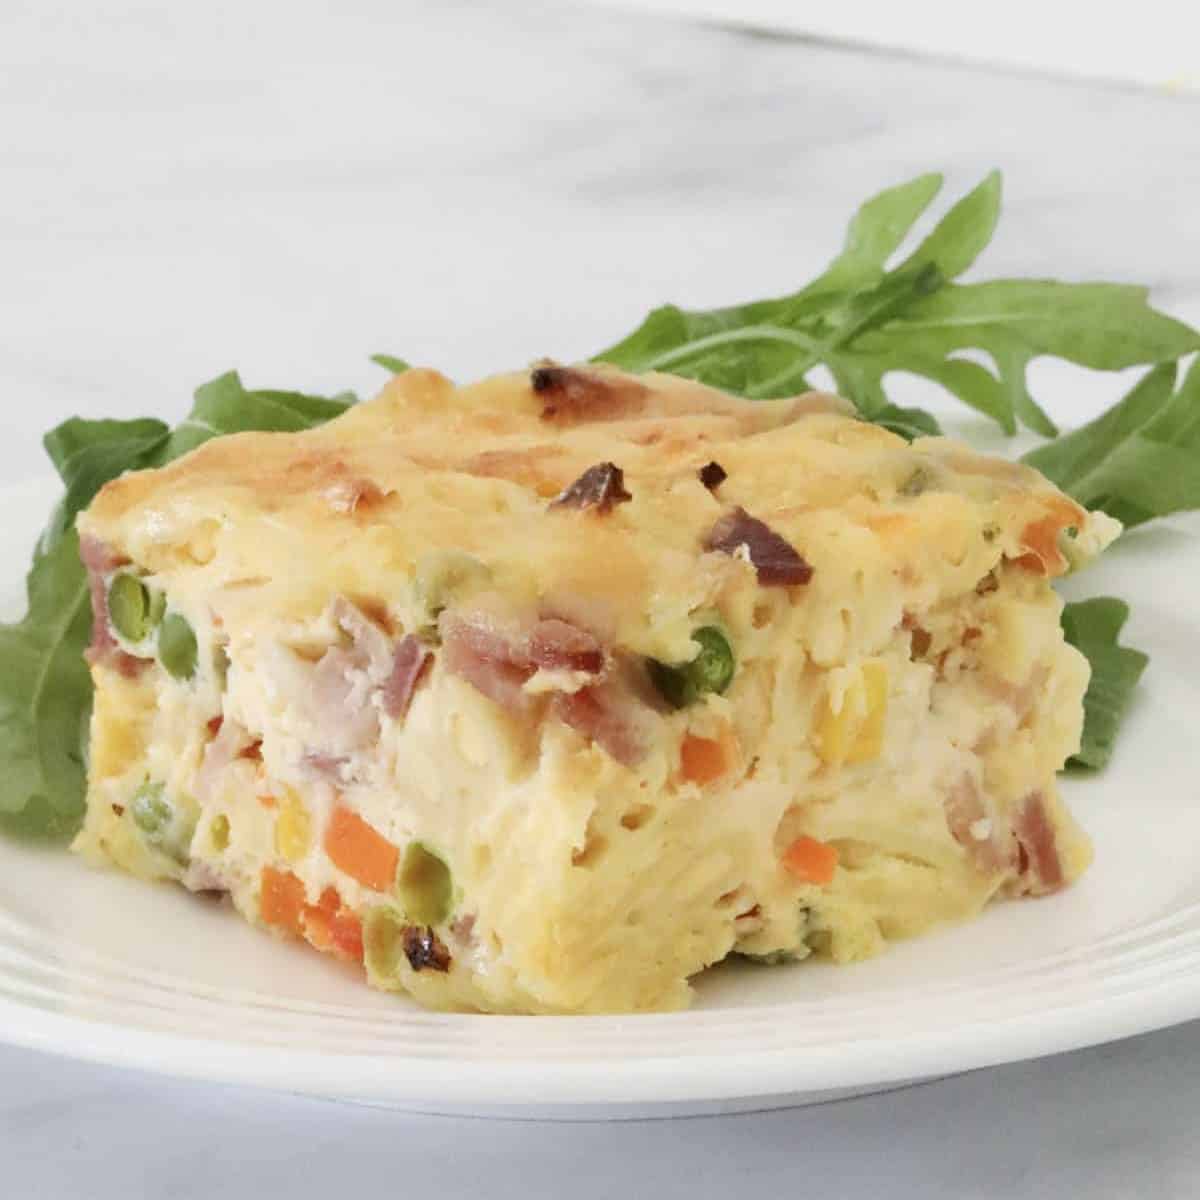 A slice of frittata with vegetables and macaroni.